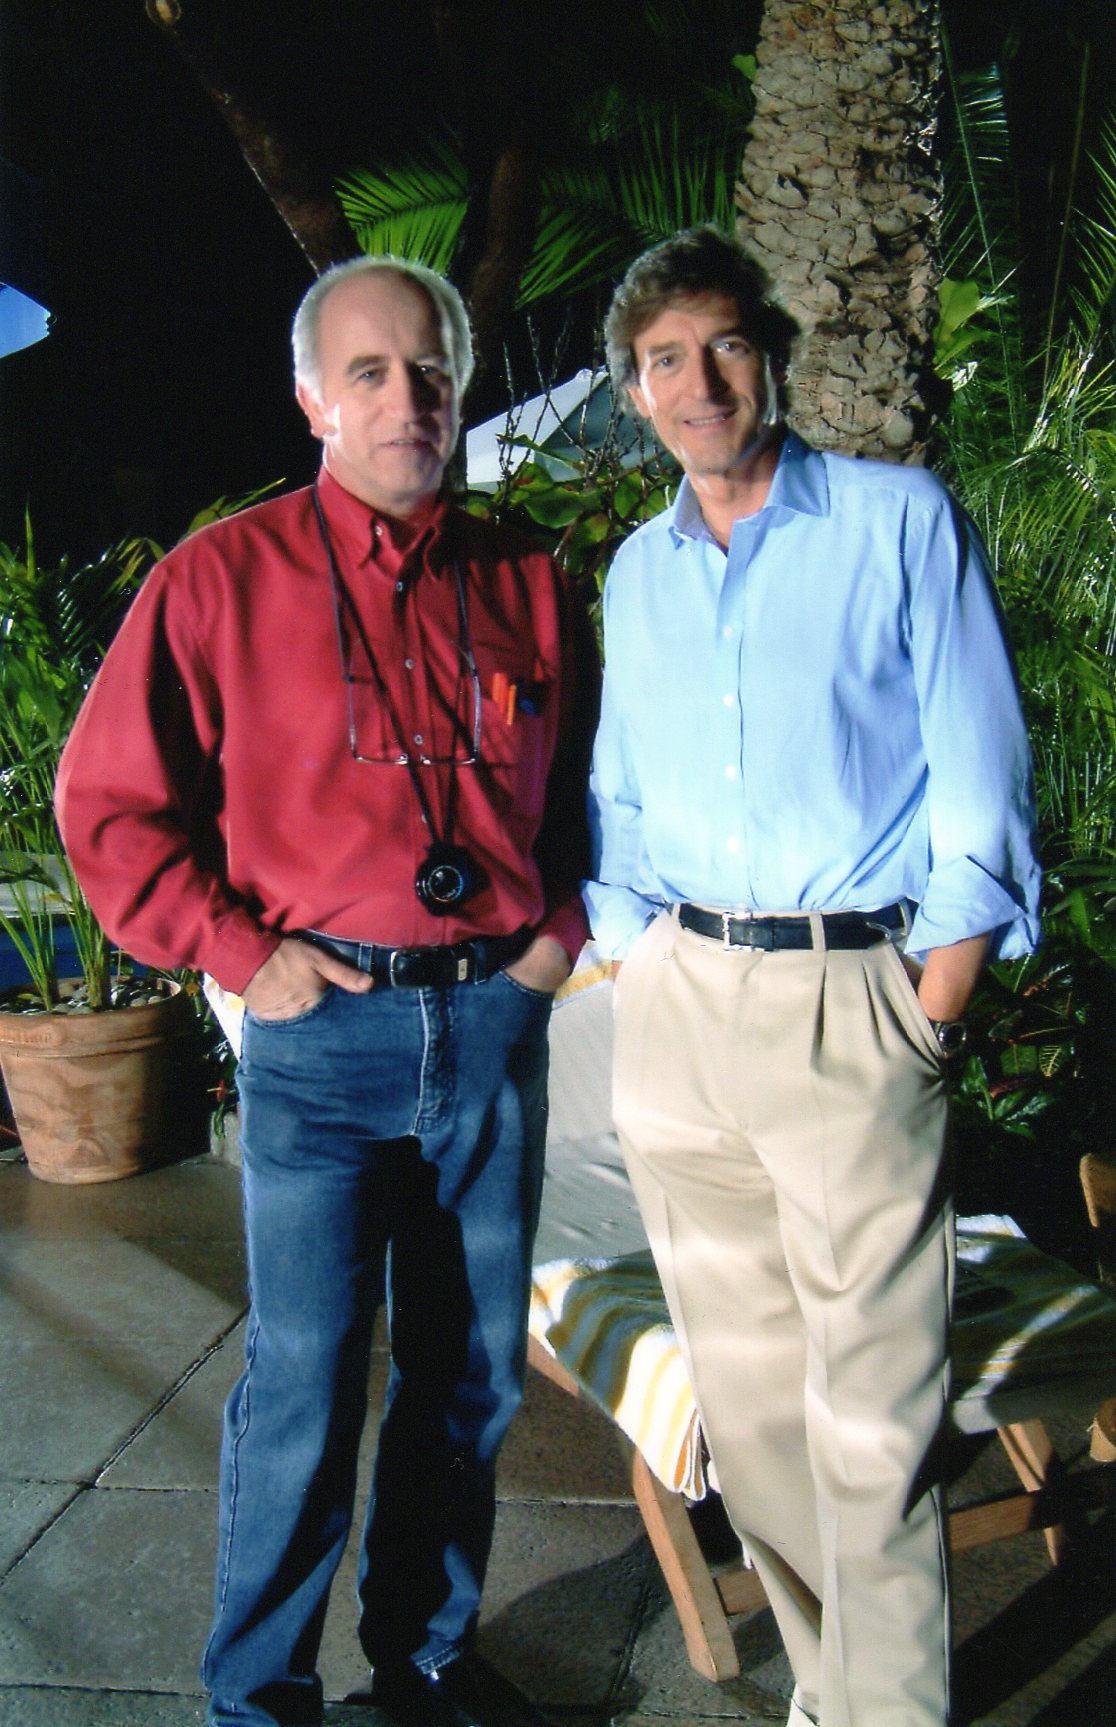 Me with Actor Nigel Havers. Directing him for TV.